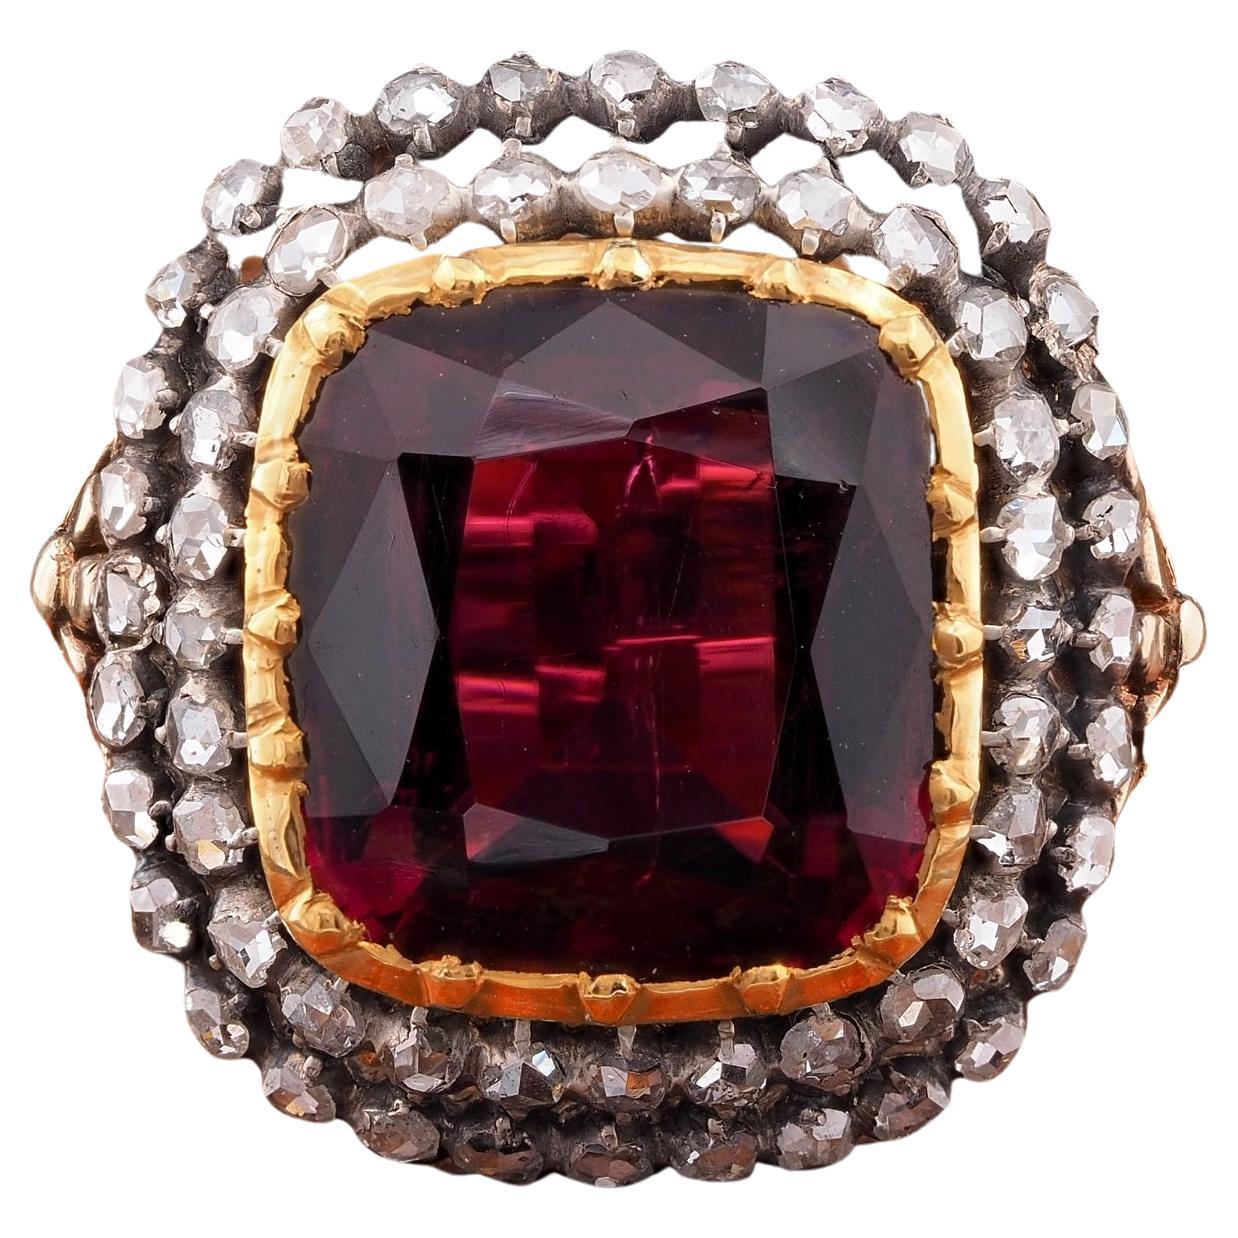 Victorian 10.95 CT Untreated Magenta Rubellite or Red Tourmaline Diamond Ring For Sale